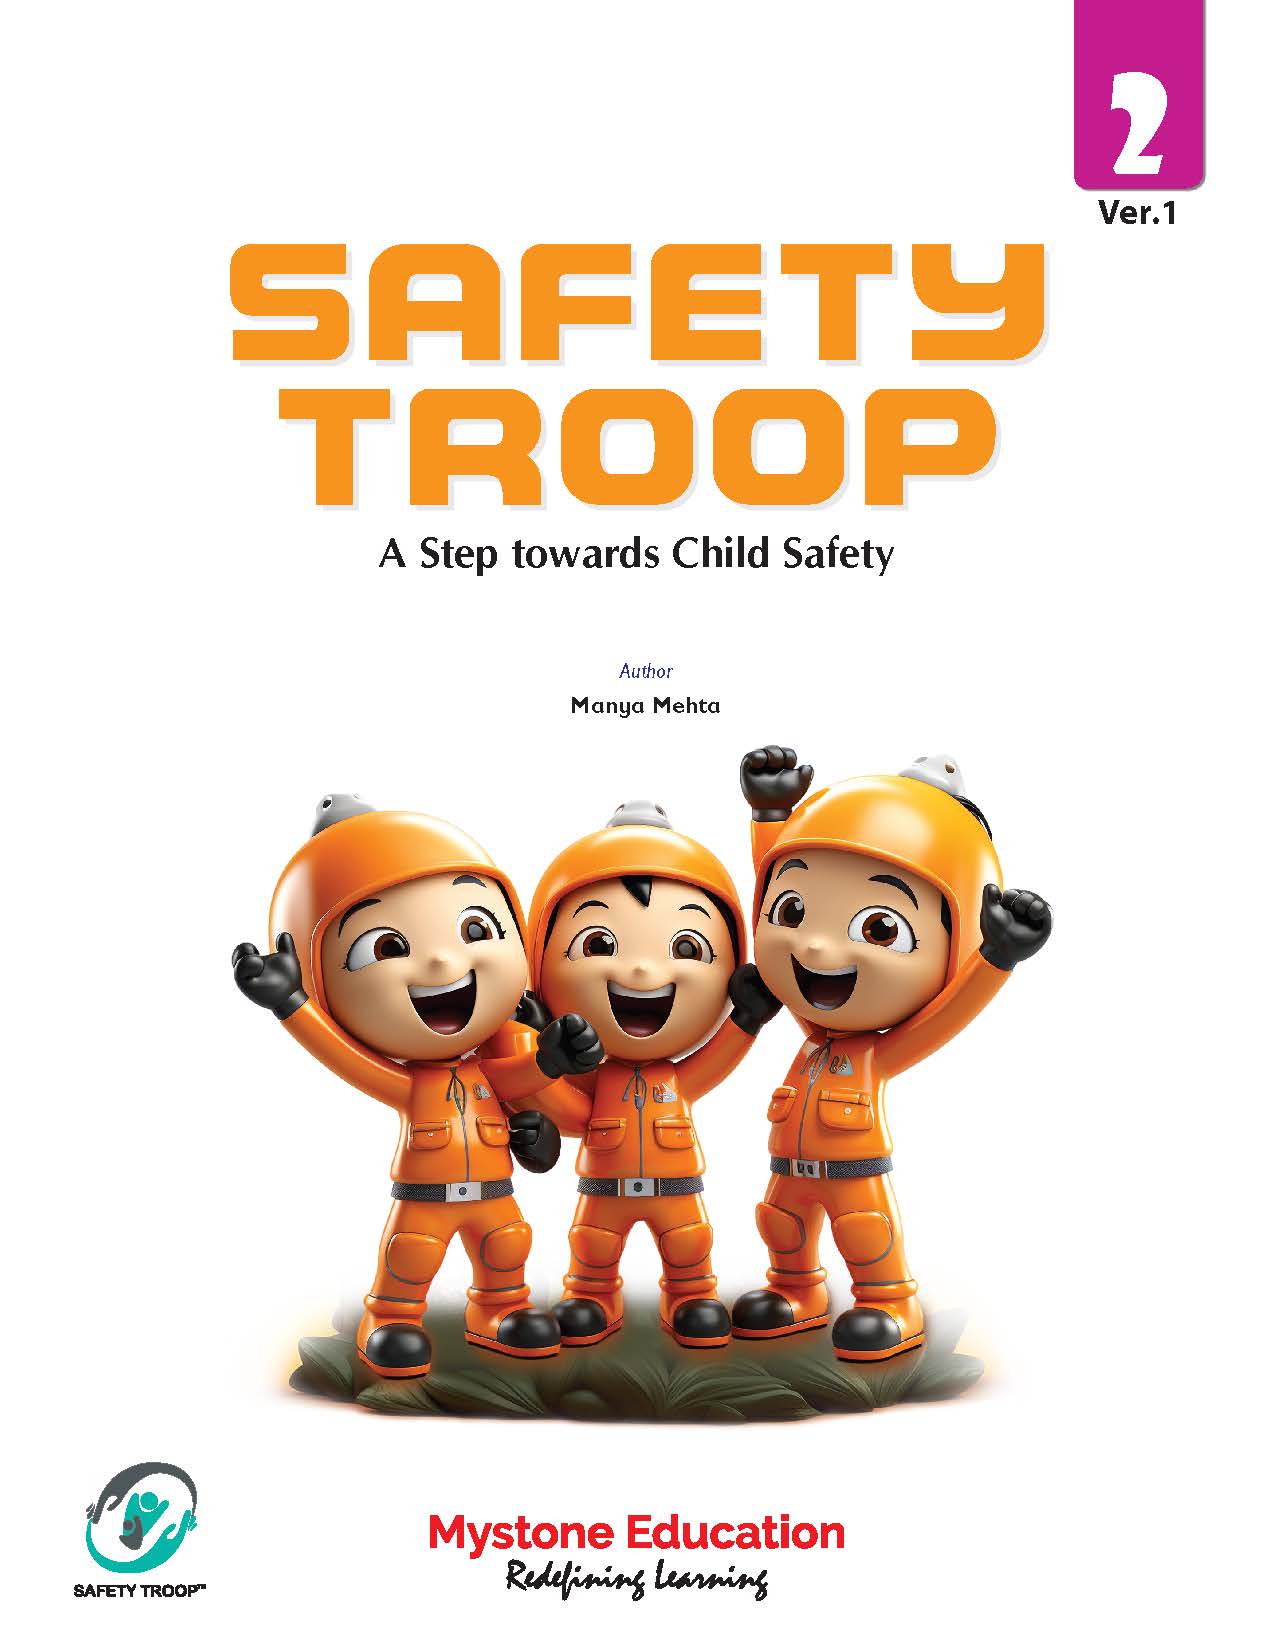 Safety Troop (A Step Towards Child Safety) Class 2 Ver 1